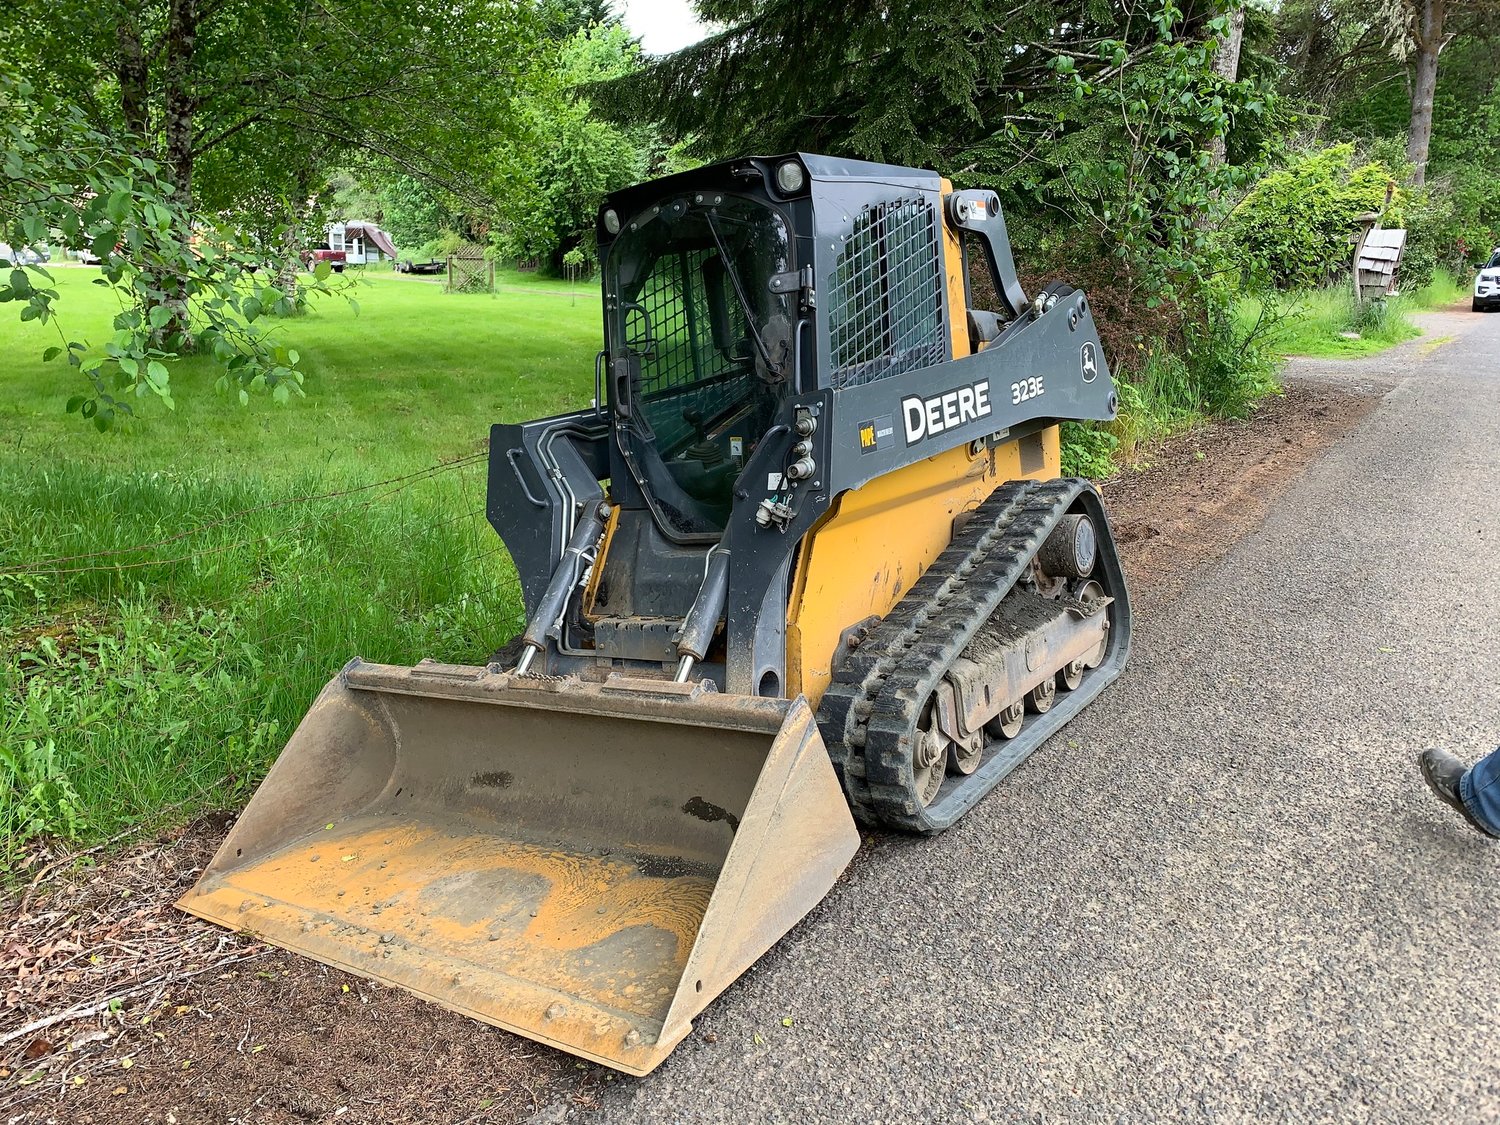 A second suspect has been convicted in Grays Harbor Superior Court following the June 2022 theft of an $80,000 skid-steer loader at Oakville High School, according to a news release from the Grays Harbor County Sheriff’s Office. 